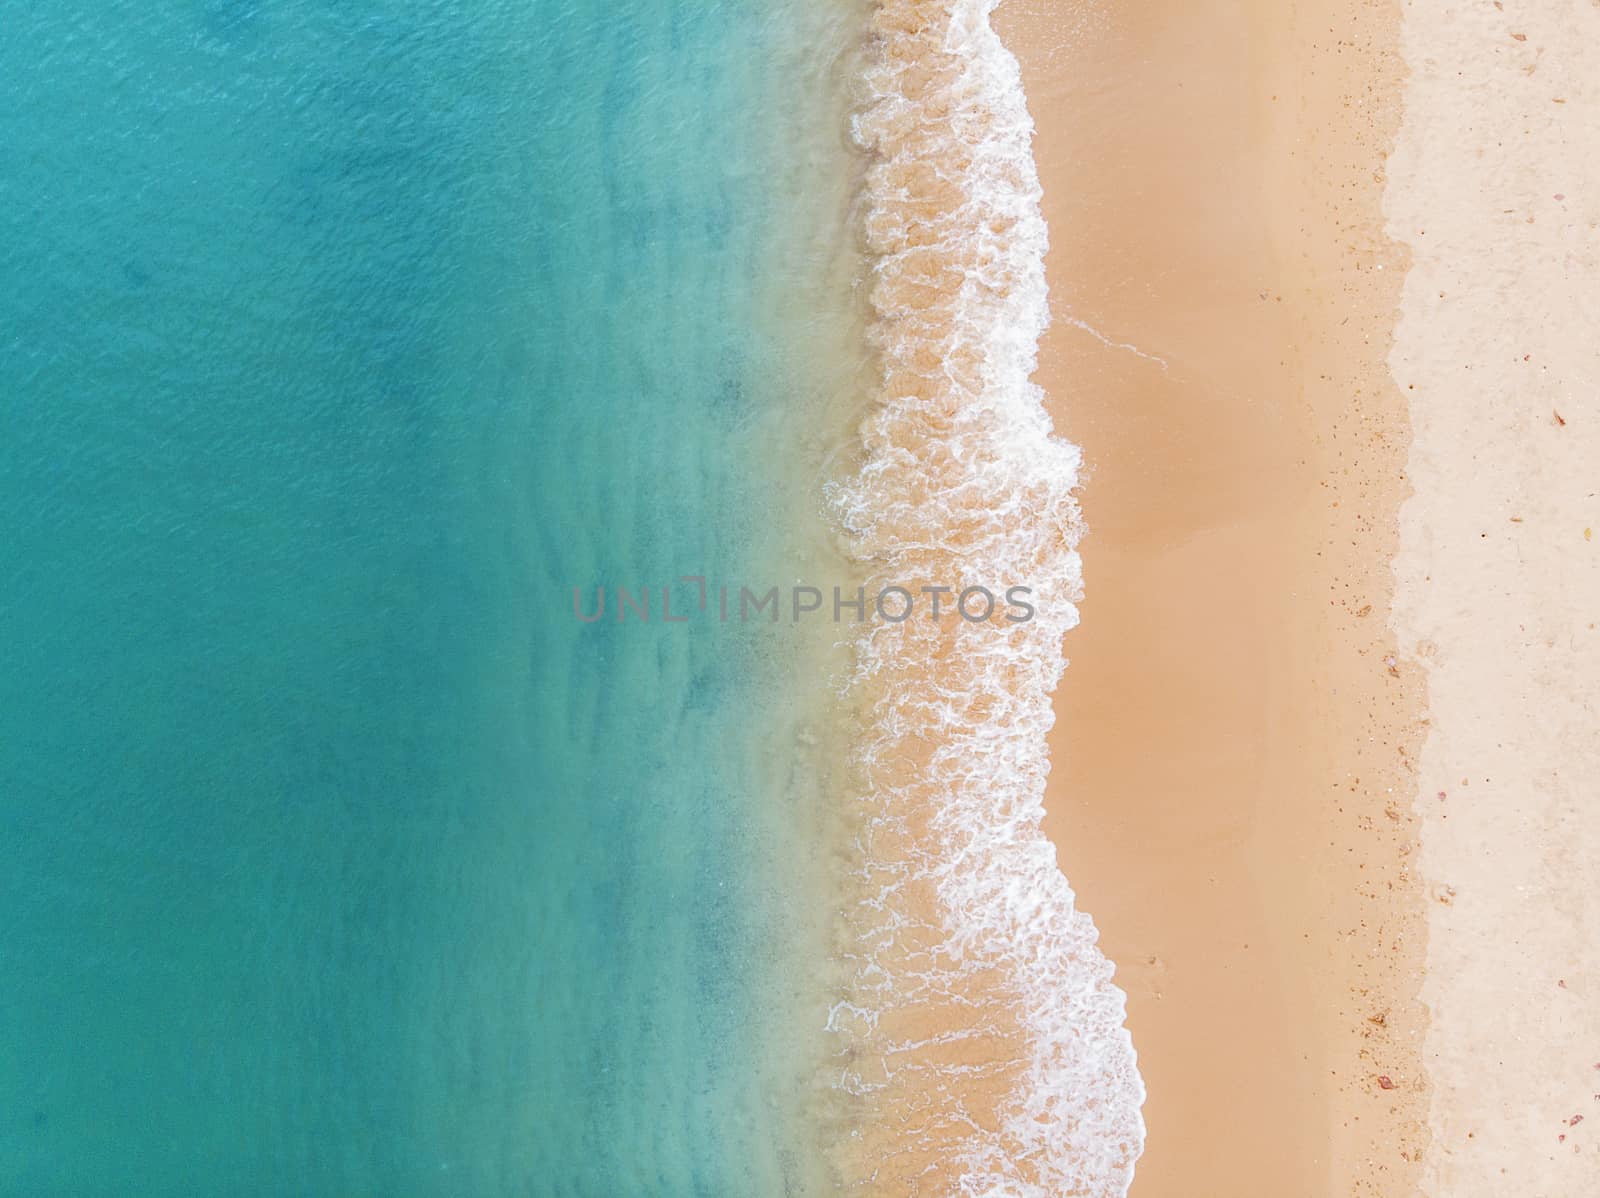 Aerial view of beach and blue ocean with waves reaching shore